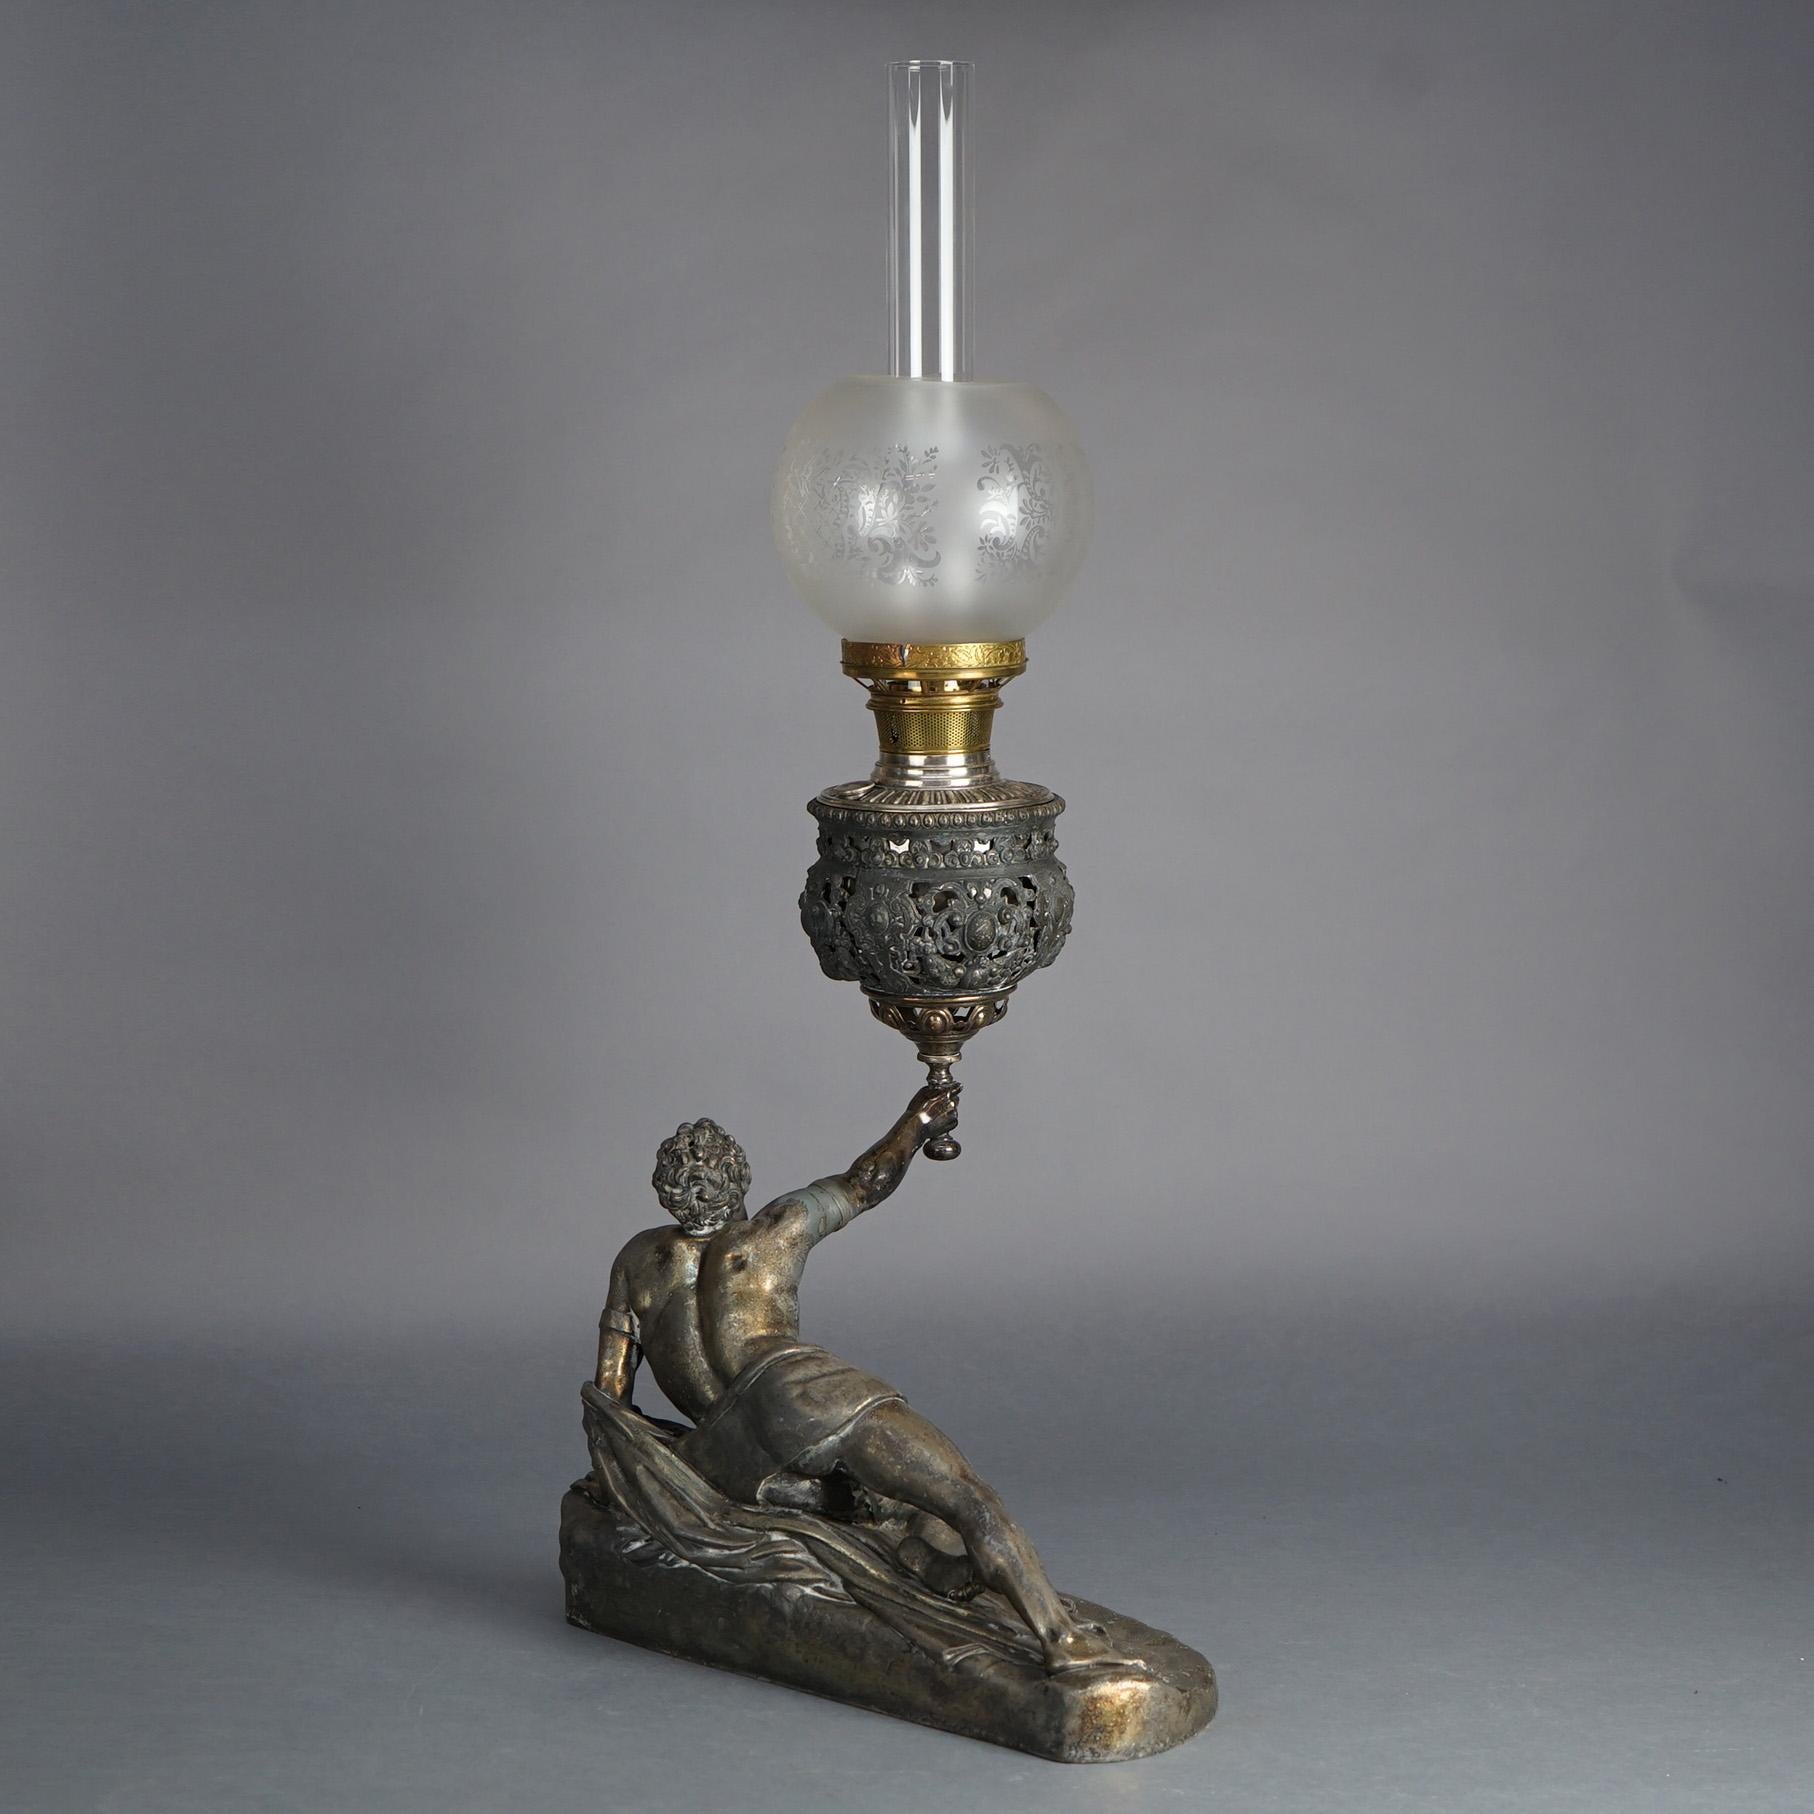 An antique figural 'Soldat Spartiate' oil lamp by Bradley and Hubbard after sculpture by Jean-Pierre Cortot (French, 1787-1843) depicts a Spartan soldier holding an oil lamp aloft; titled as photographed; c1810

Measures- 35''H x 16.5''W x 12''D